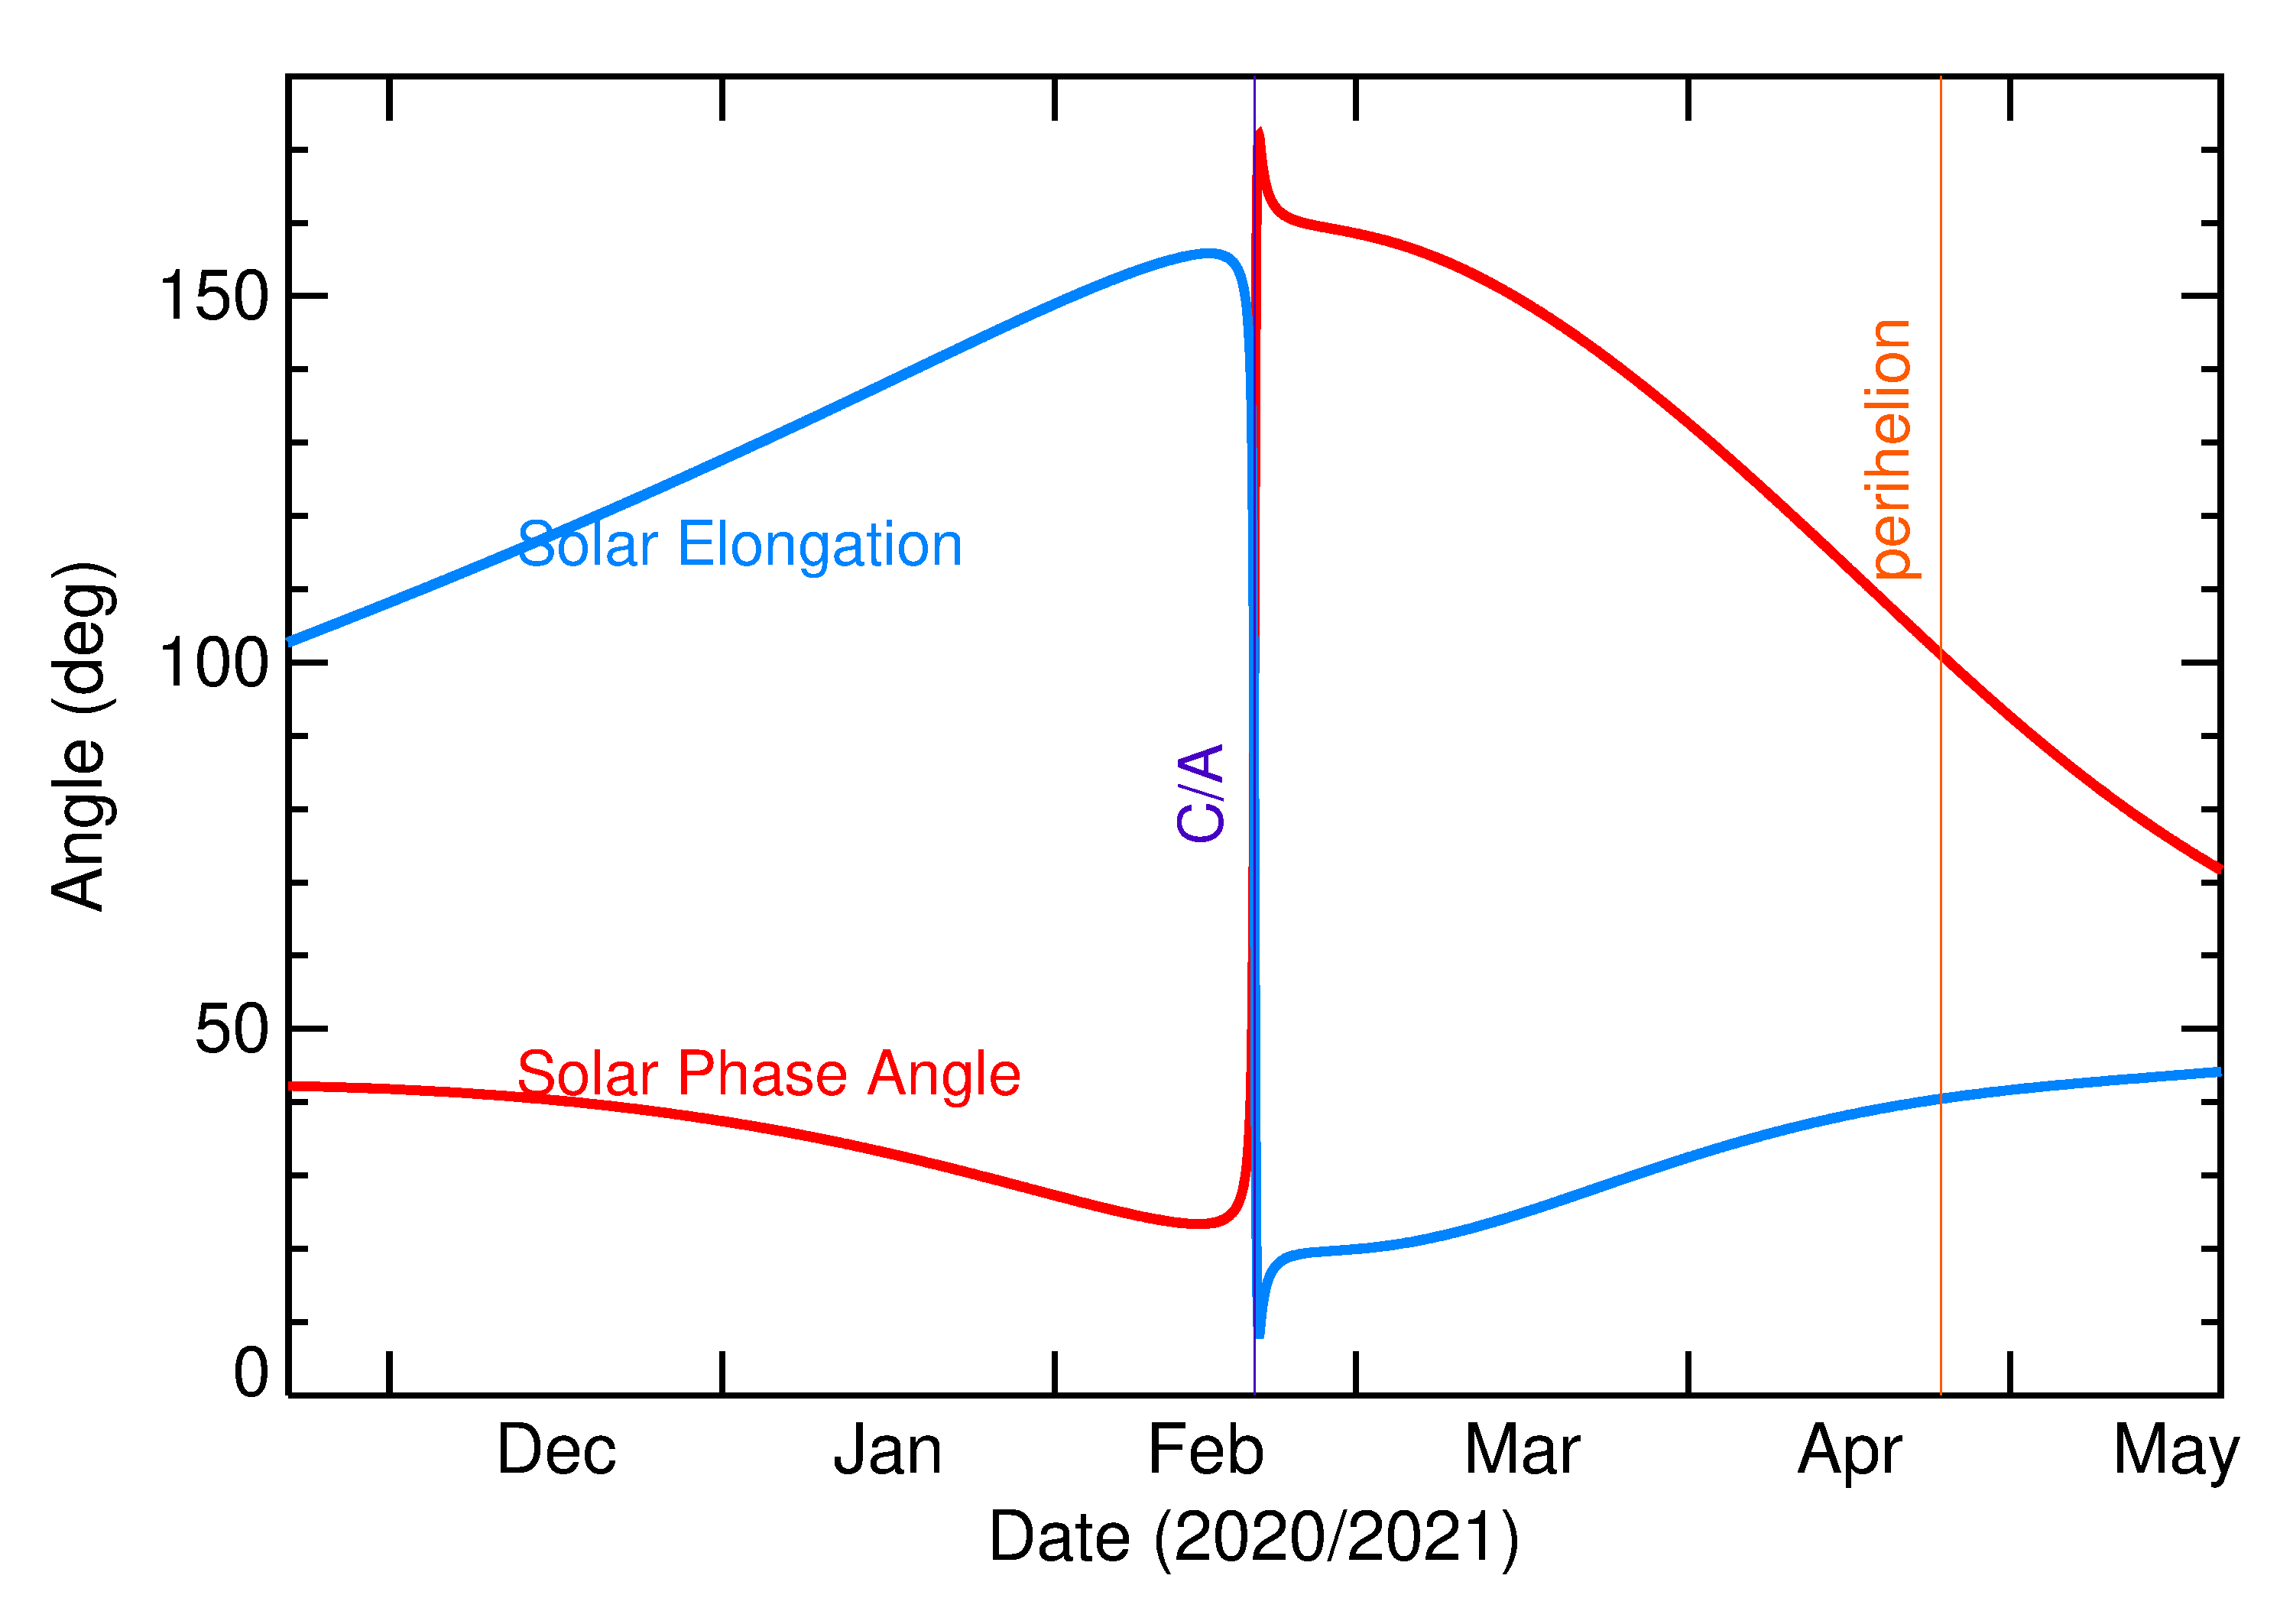 Solar Elongation and Solar Phase Angle of 2021 DG in the months around closest approach